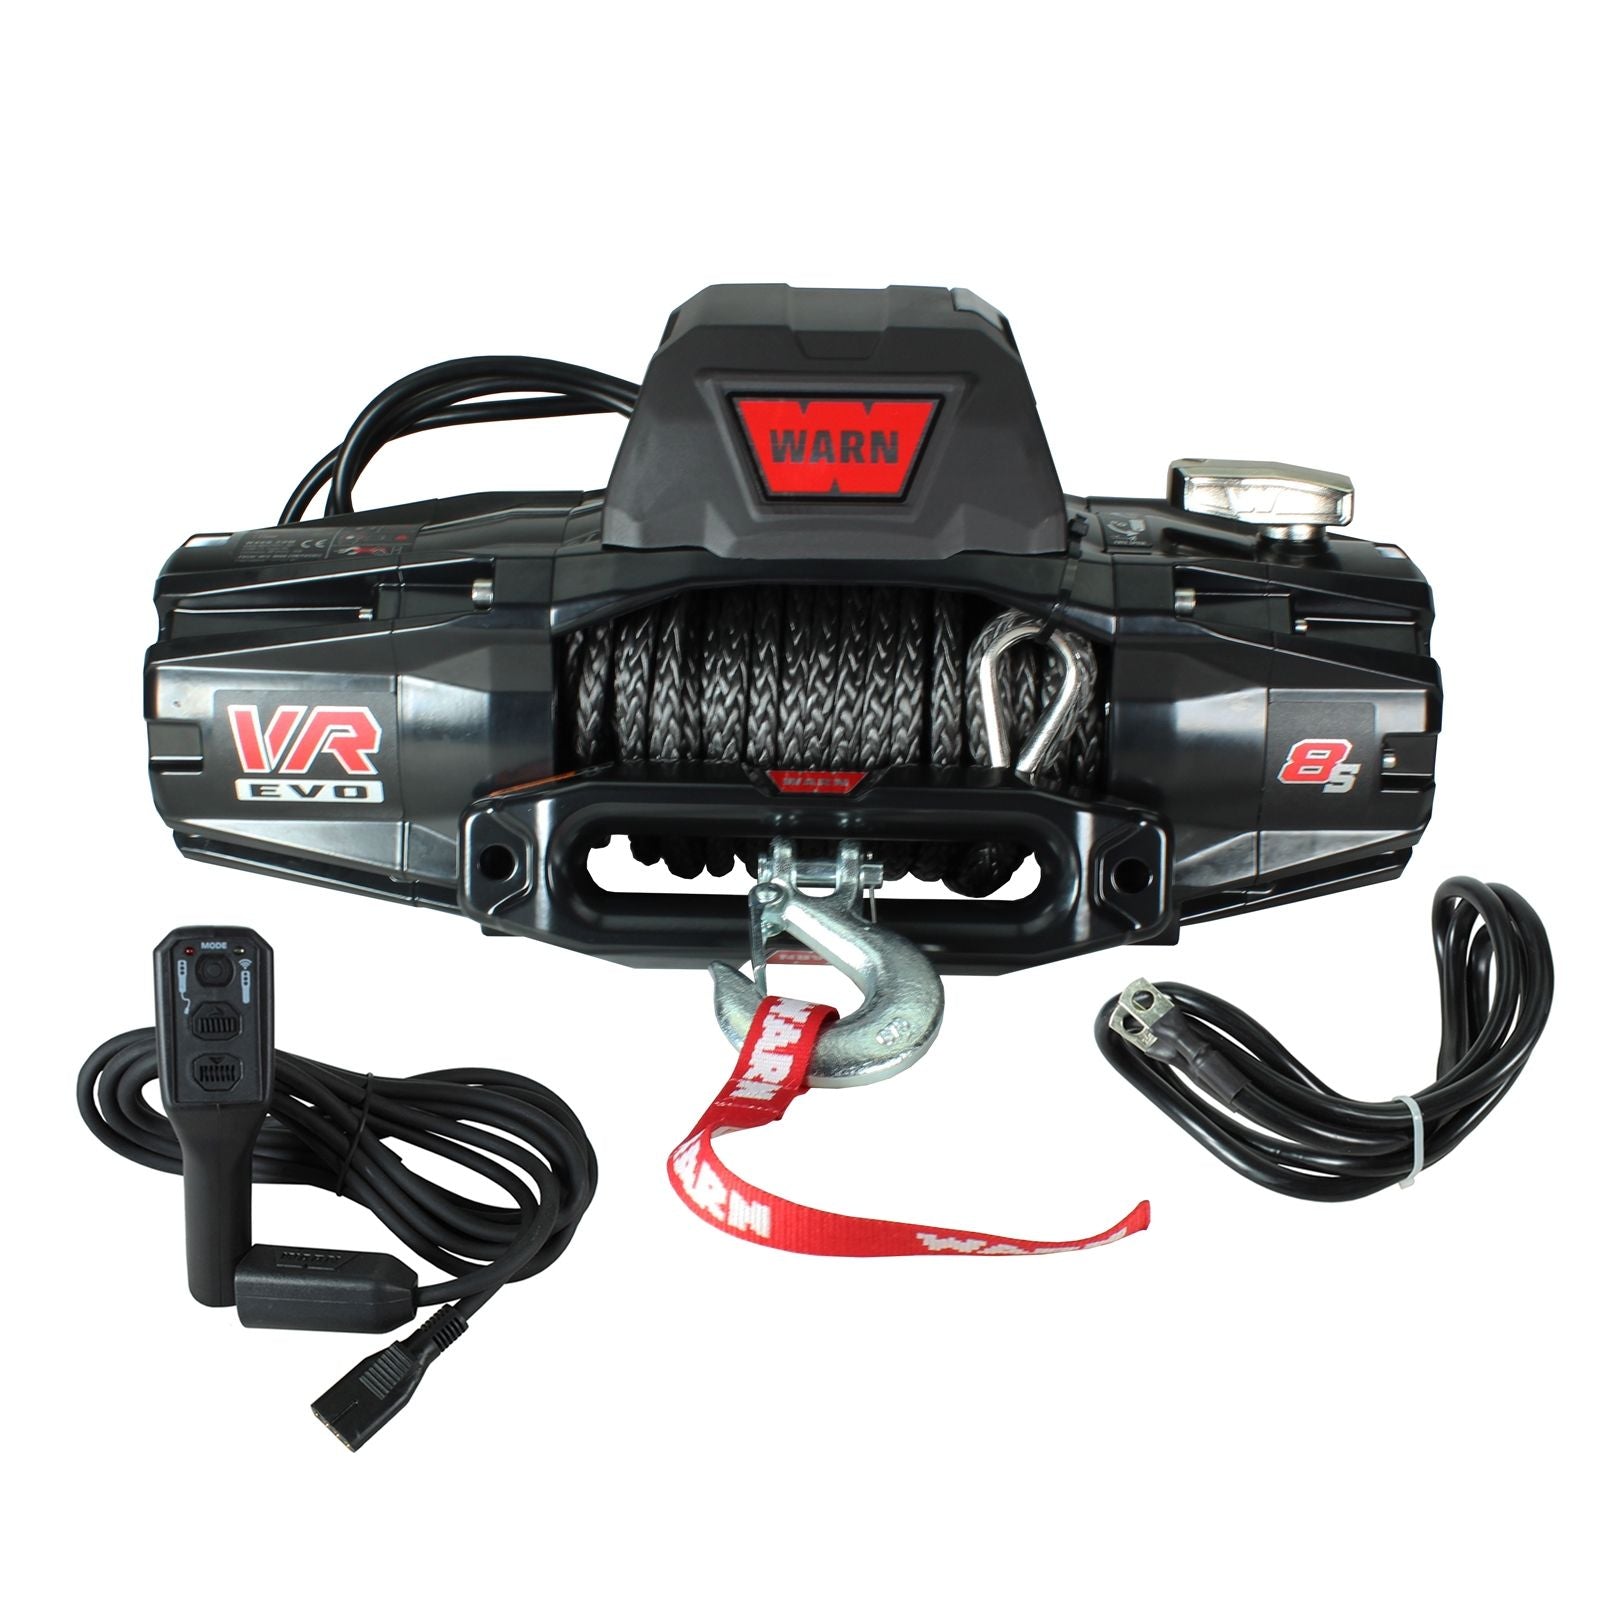 Warn VR Evo 8 12v Steel Rope Electric Winch with Wireless complete overview